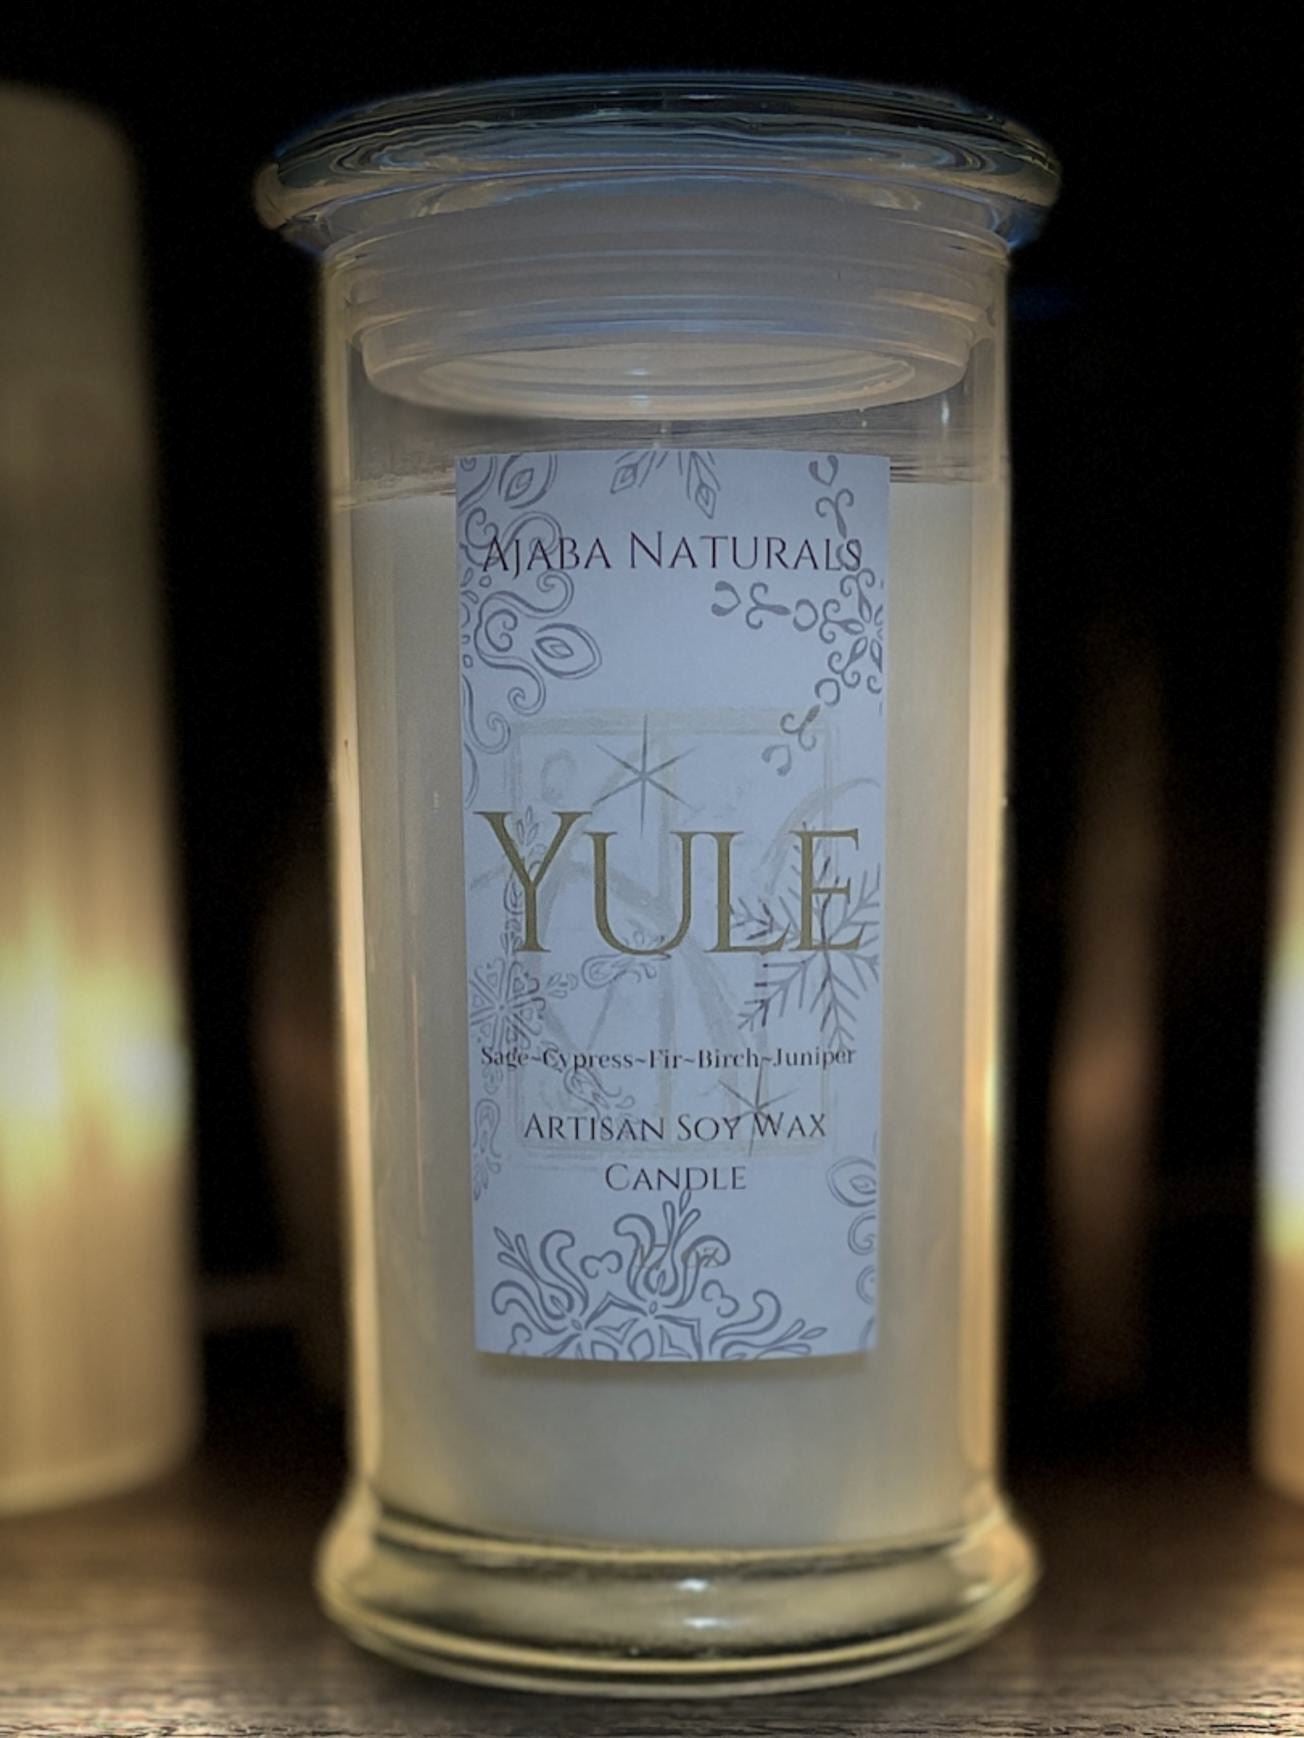 Yule Handcrafted Soy Wax Candle Candle AJABA NATURALS™ 